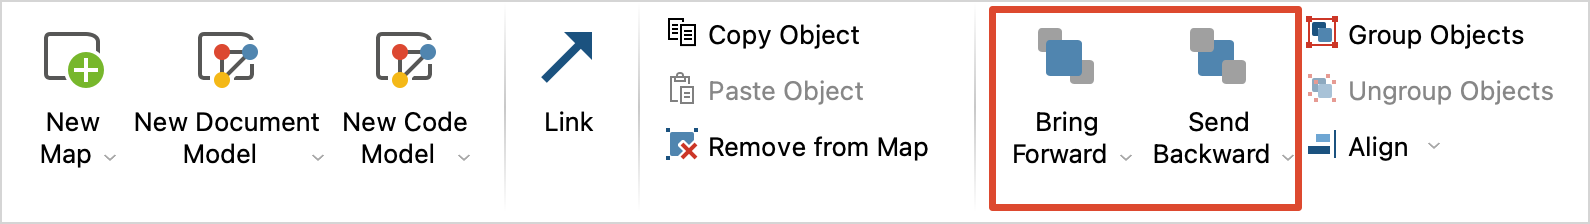 You can move objects further forward or back with the icons framed in red.